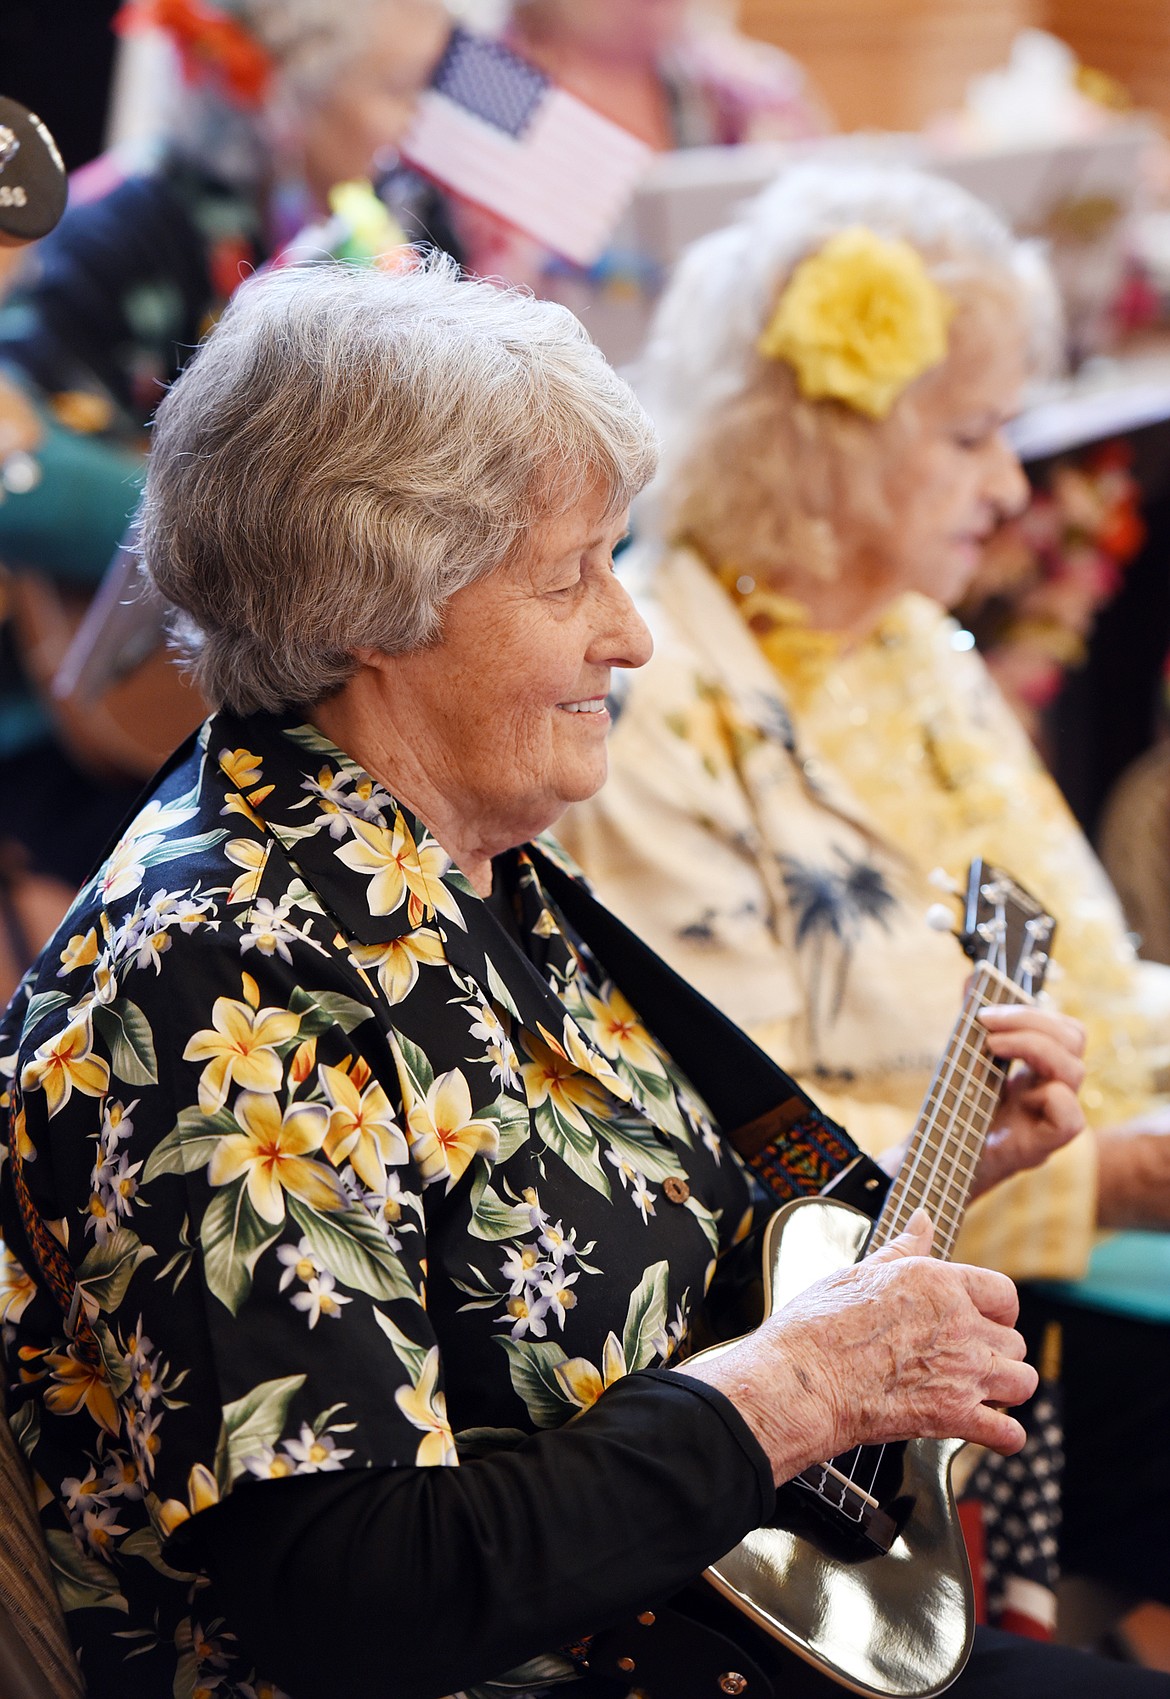 RETHA JAKEAWAY and members of the Kaz-Uke-Eeeef play for&#160;the residents at Immanuel Lutheran Communities on Monday, April 17, in Kalispell.
(Brenda Ahearn/Daily Inter Lake)